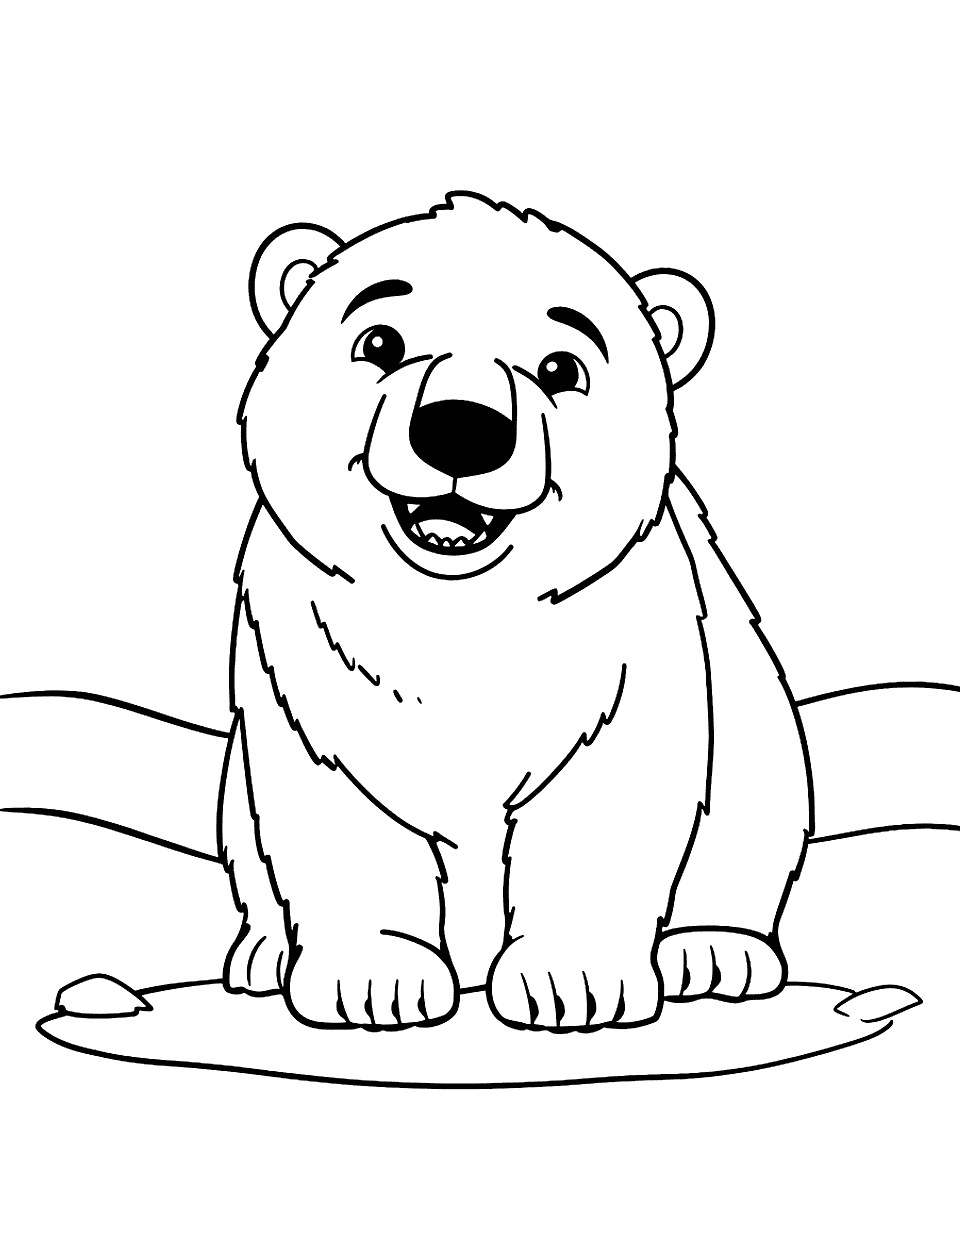 Smiling Polar Bear Coloring Page - A polar bear with a big, cheerful smile, eyes twinkling.